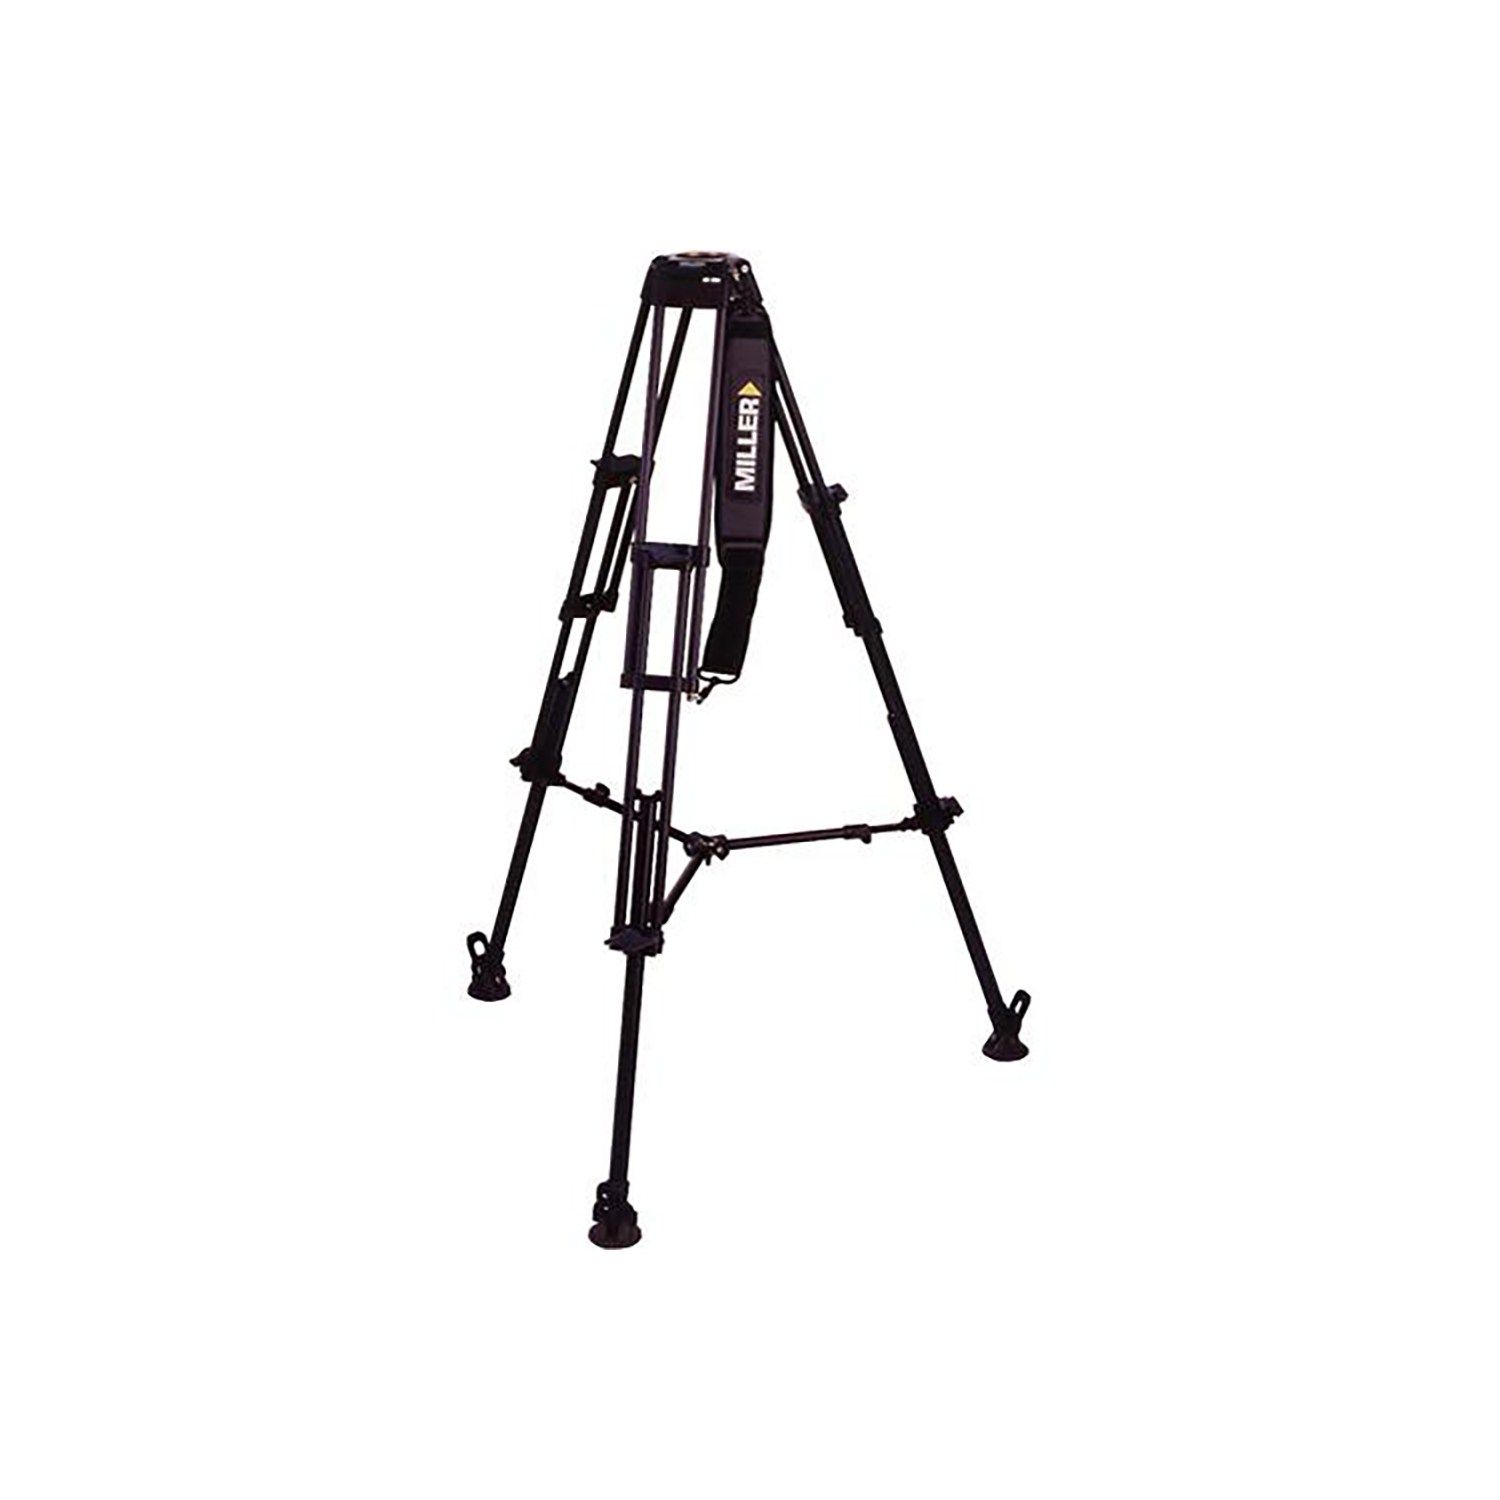 MILLER Toggle 2-St Alloy Tripod to suit 508 Above Ground Spreader